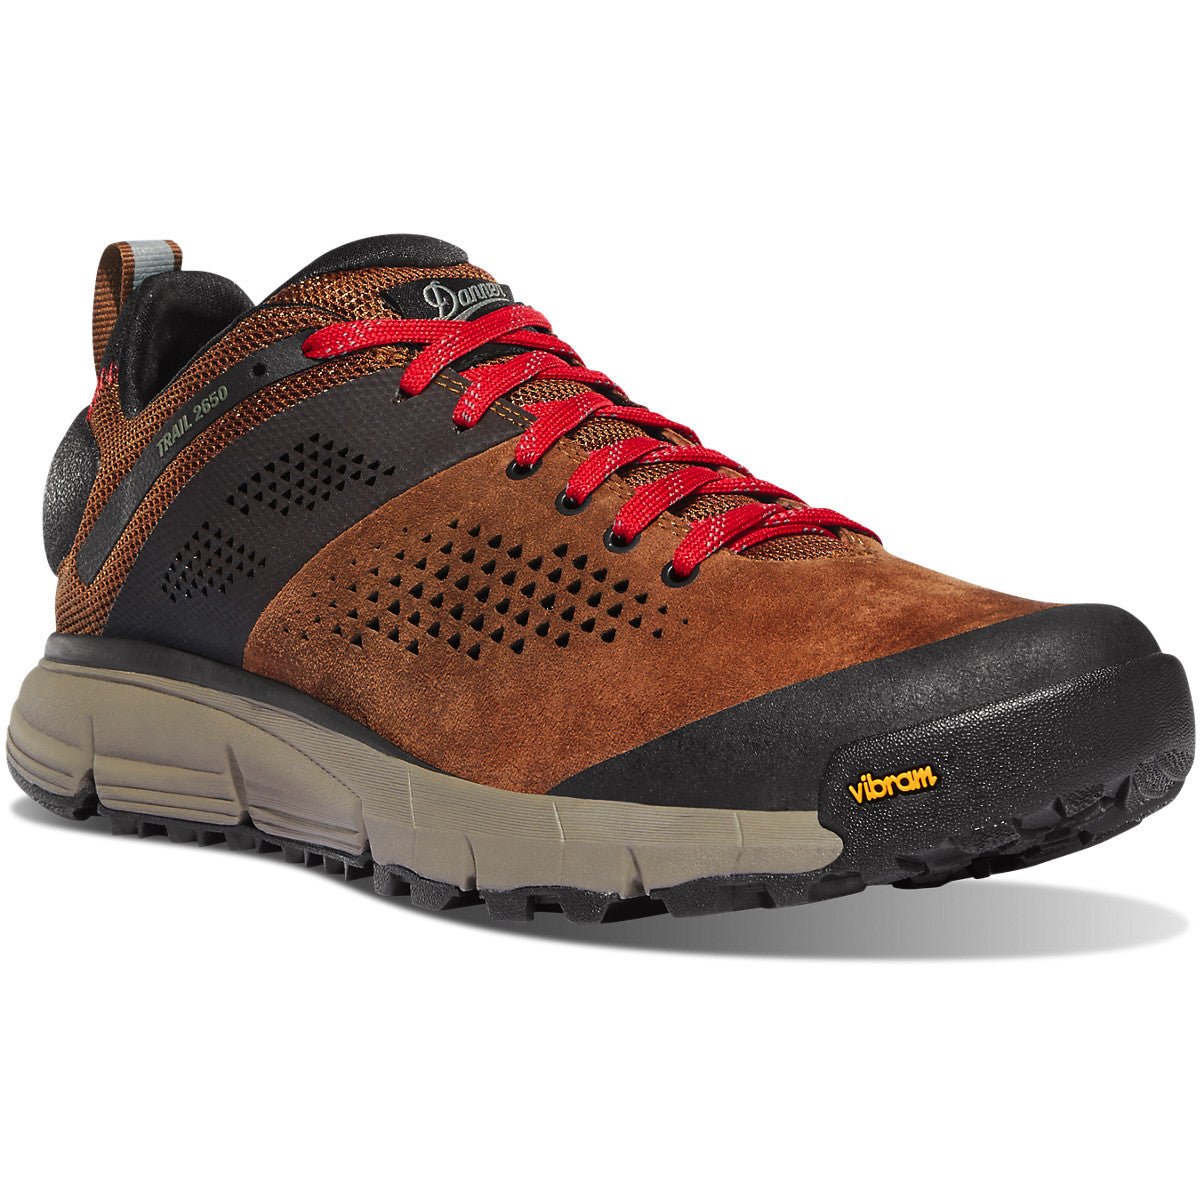 Danner Men's Trail 2650 3" Hiking Shoe in Brown/Red from the side